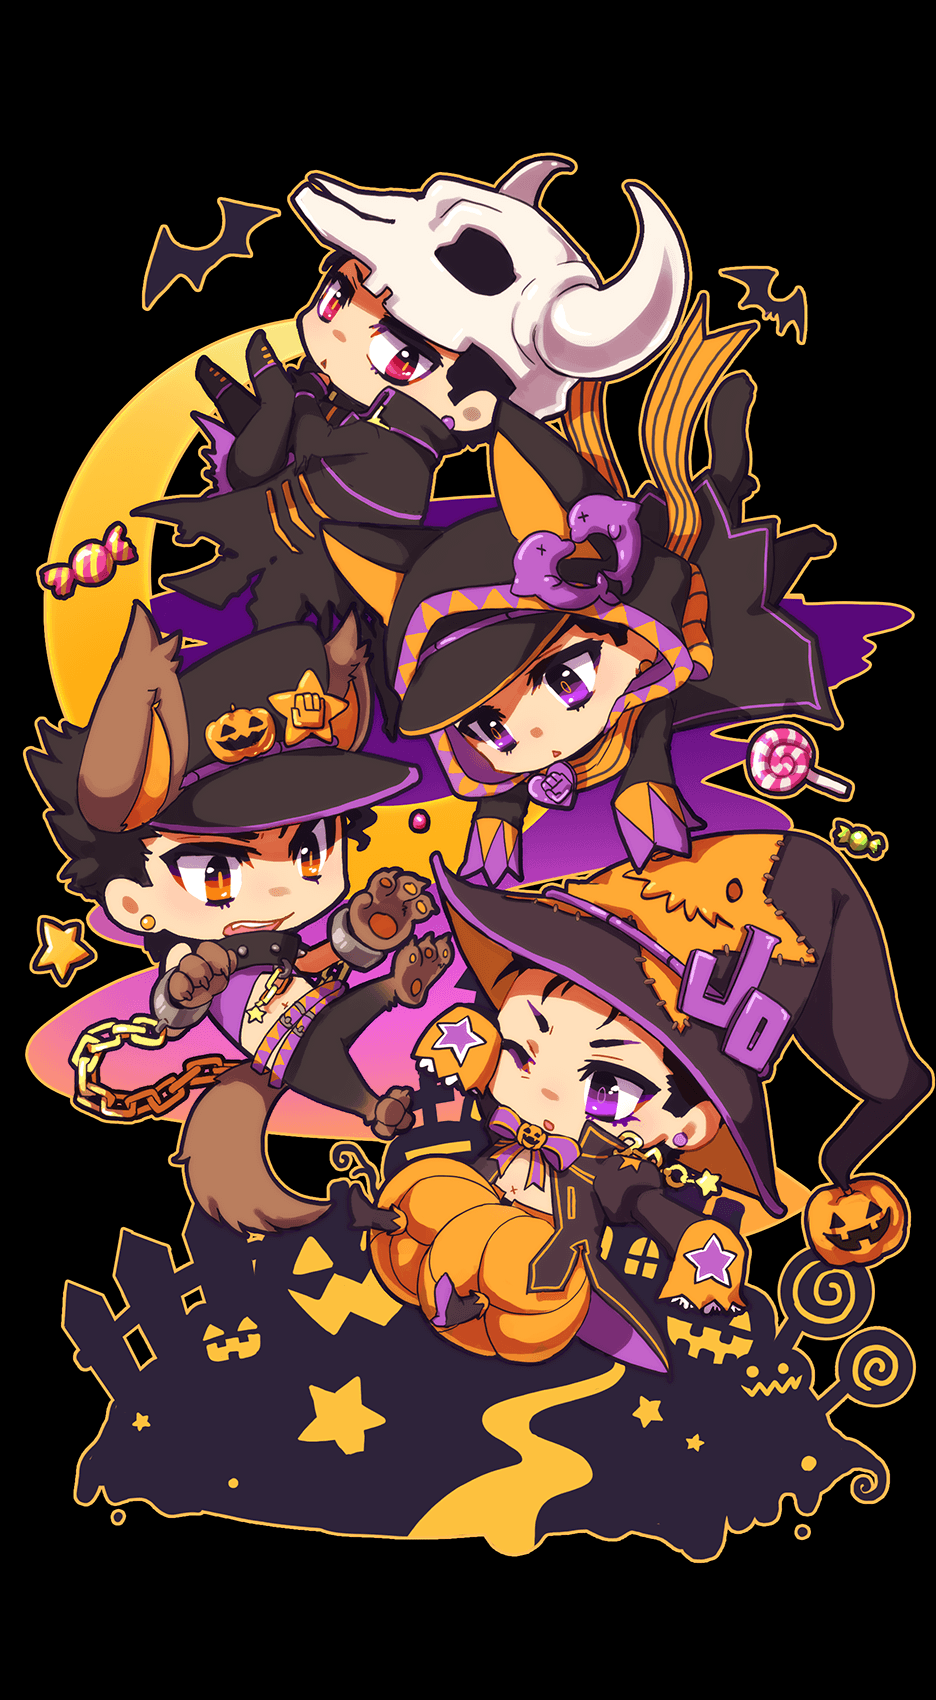 4boys animal_ears bare_chest bat black_hair candy chain chibi coat collar cuffs earrings hat highres jack-o'-lantern jacket jewelry jojo_no_kimyou_na_bouken kuujou_joutarou male_focus multiple_boys multiple_persona navel one_eye_closed open_clothes open_jacket open_mouth orange_eyes paws pin pink_eyes pumpkin_pants shackles skull sleeves_past_wrists star syei tail violet_eyes witch_hat wolf_ears wolf_paws wolf_tail